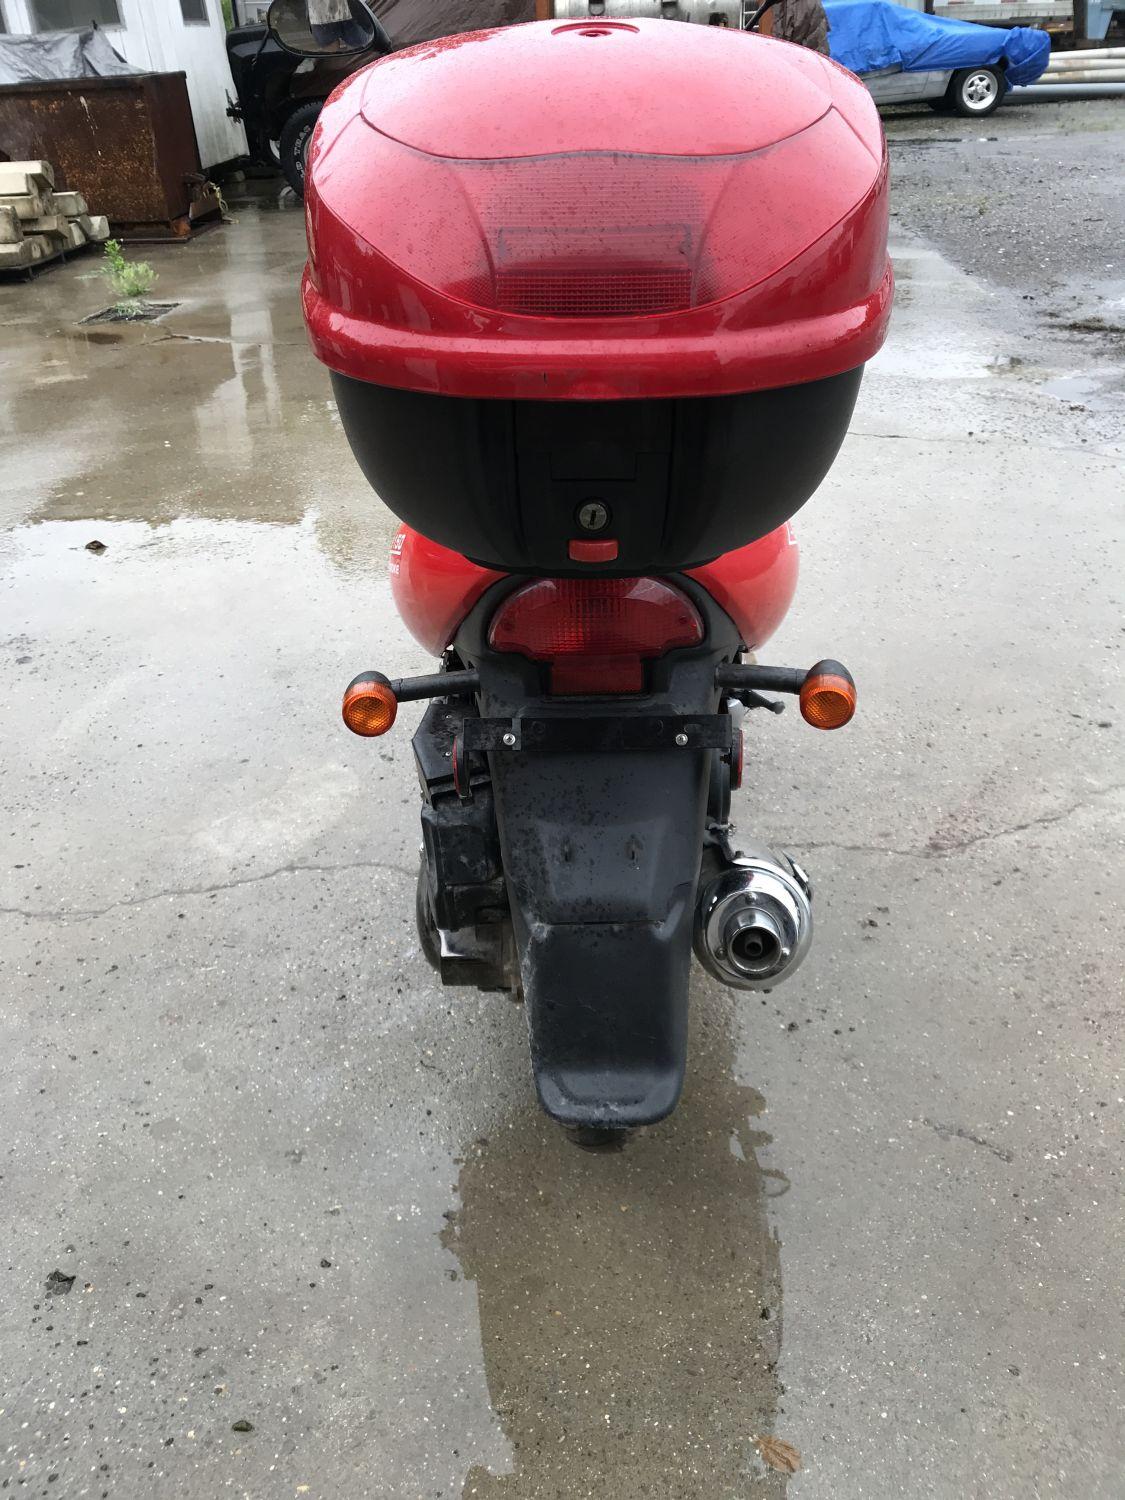 2005 Zongshen Z-bike 150 red scooter, 1 OWNER, 300mi, 150cc single cylinder air cooled four stroke g